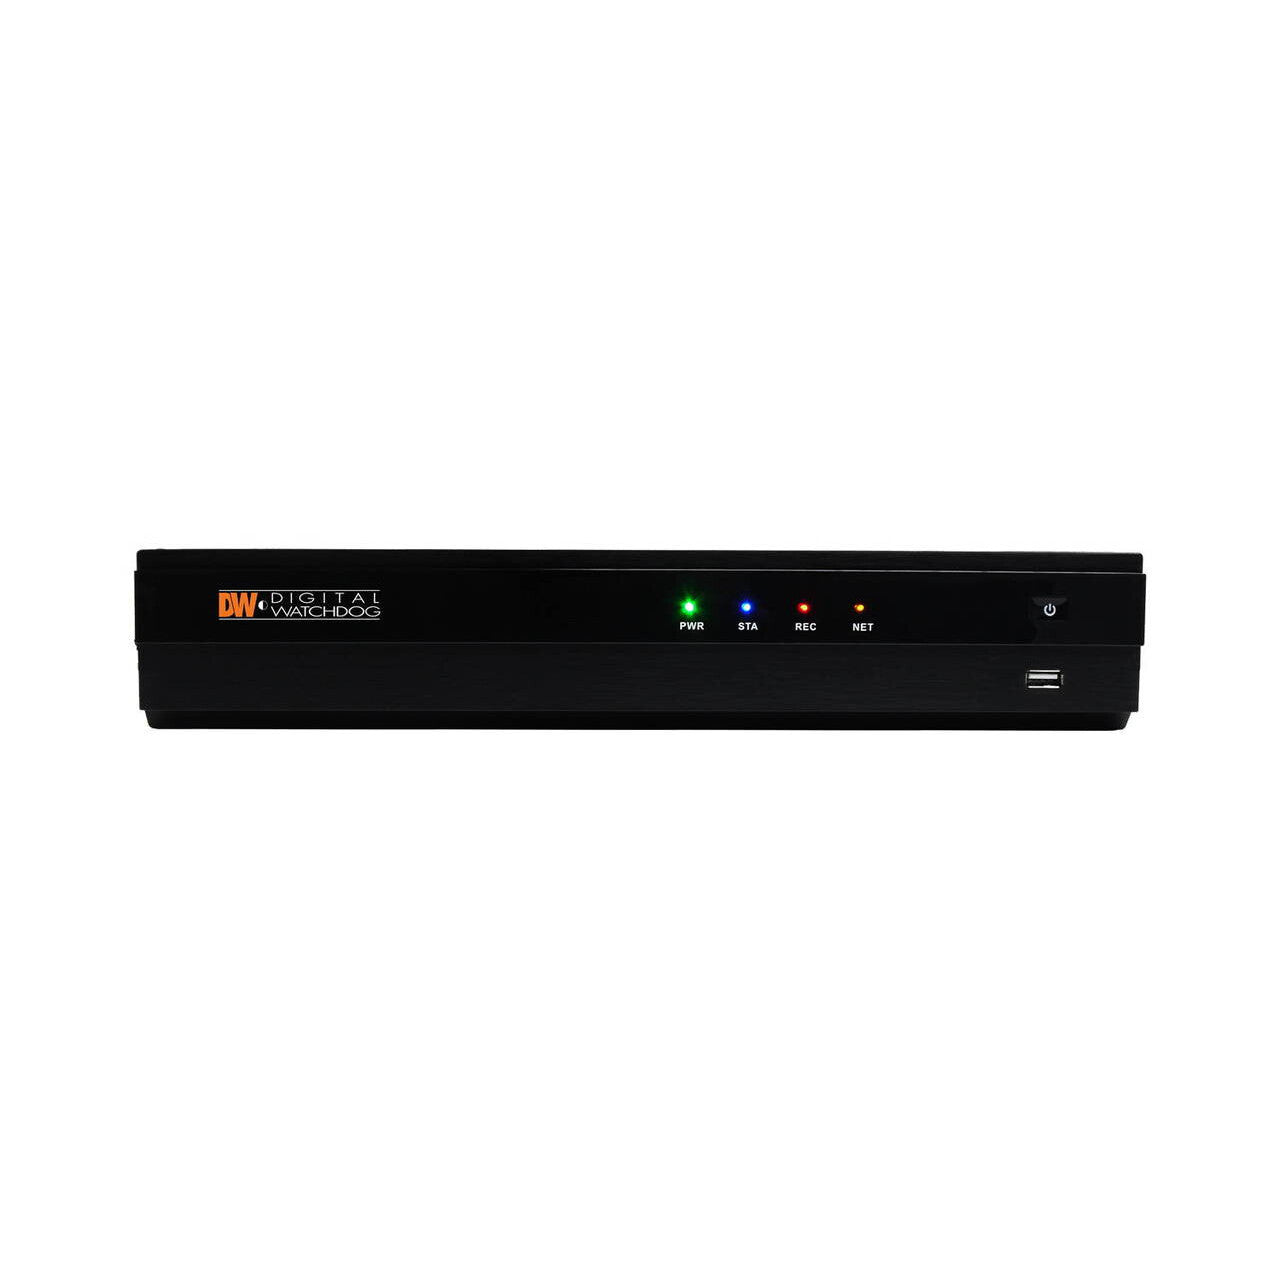 Digital Watchdog DW-VP122T8P 8-Channel PoE NVR with 2TB HDD included